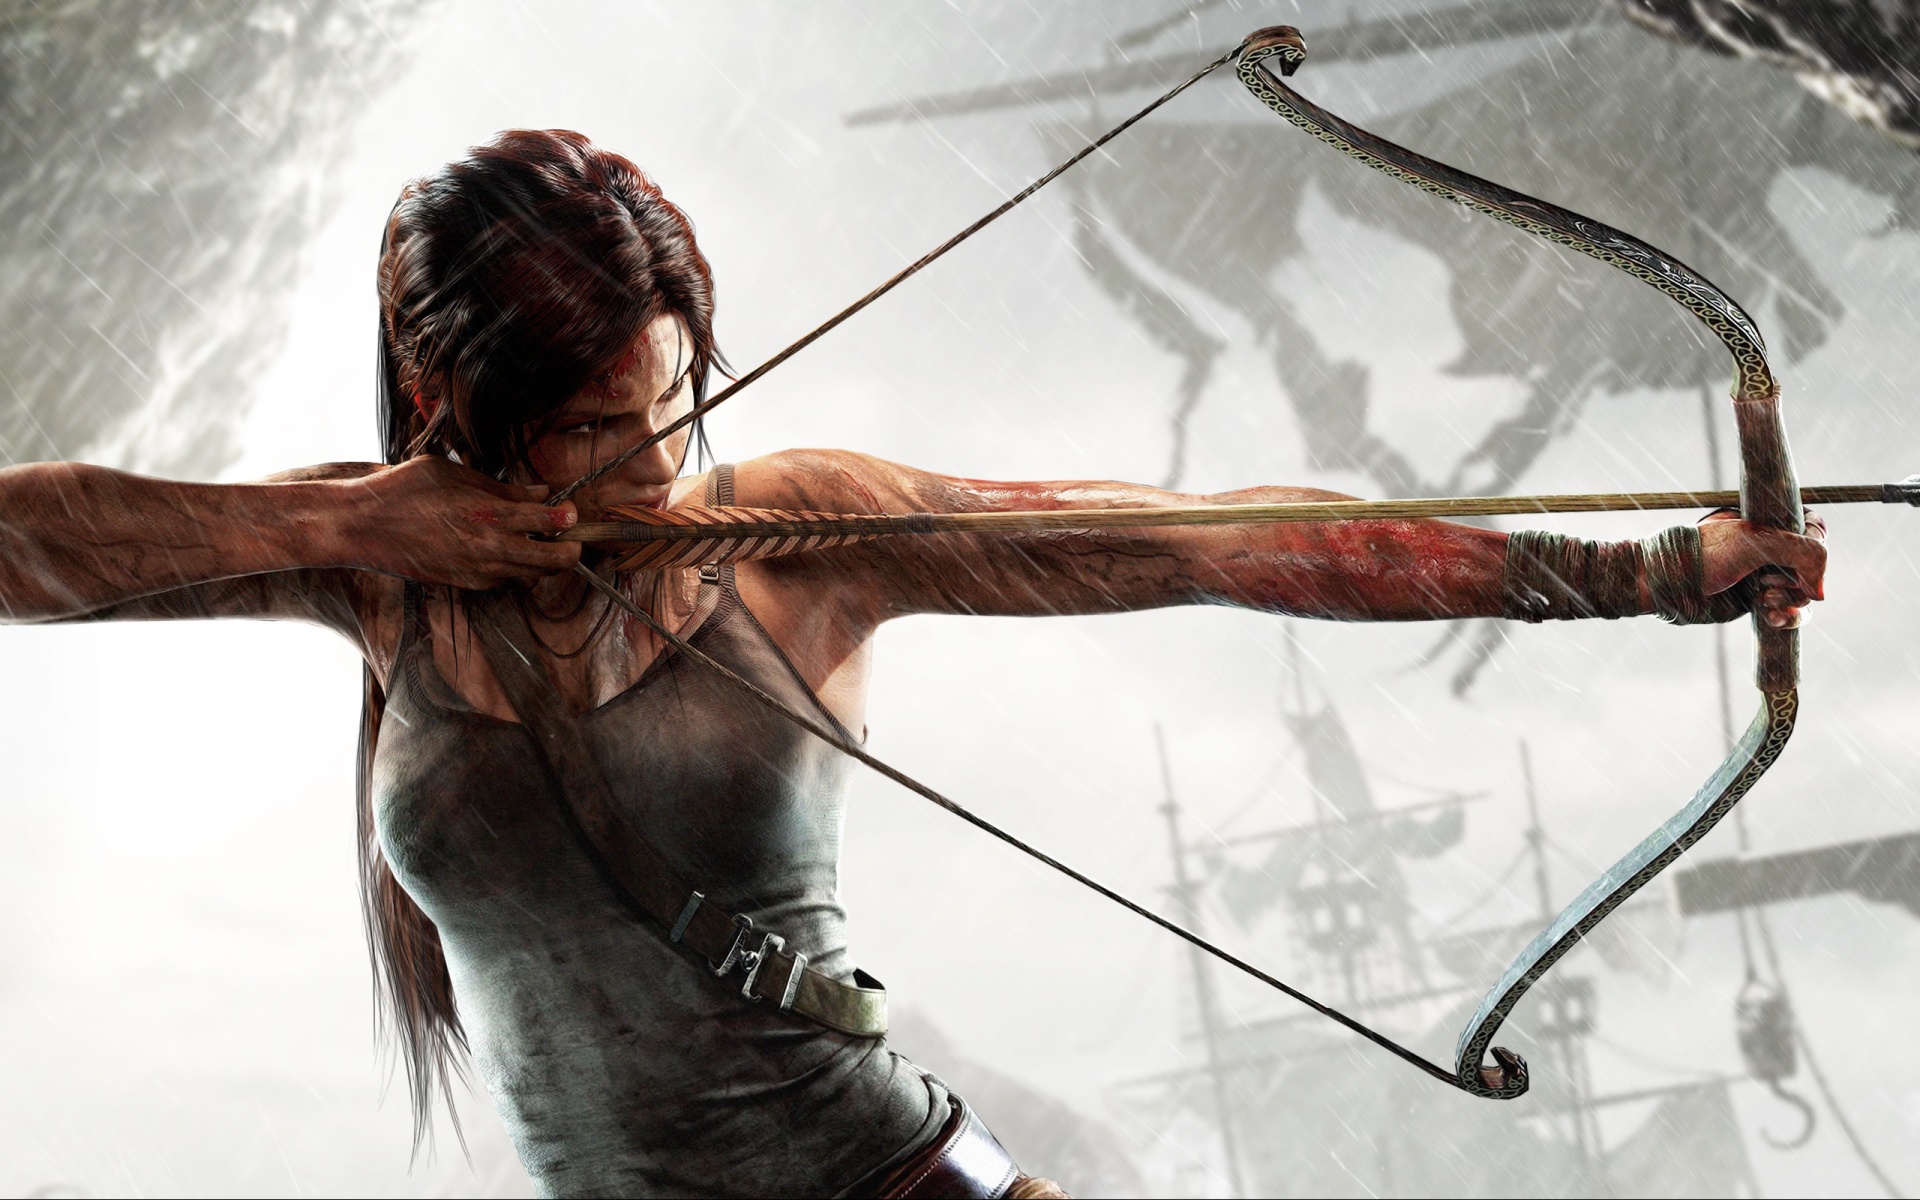 Tomb Raider 2013 Art Wallpapers HD Backgrounds